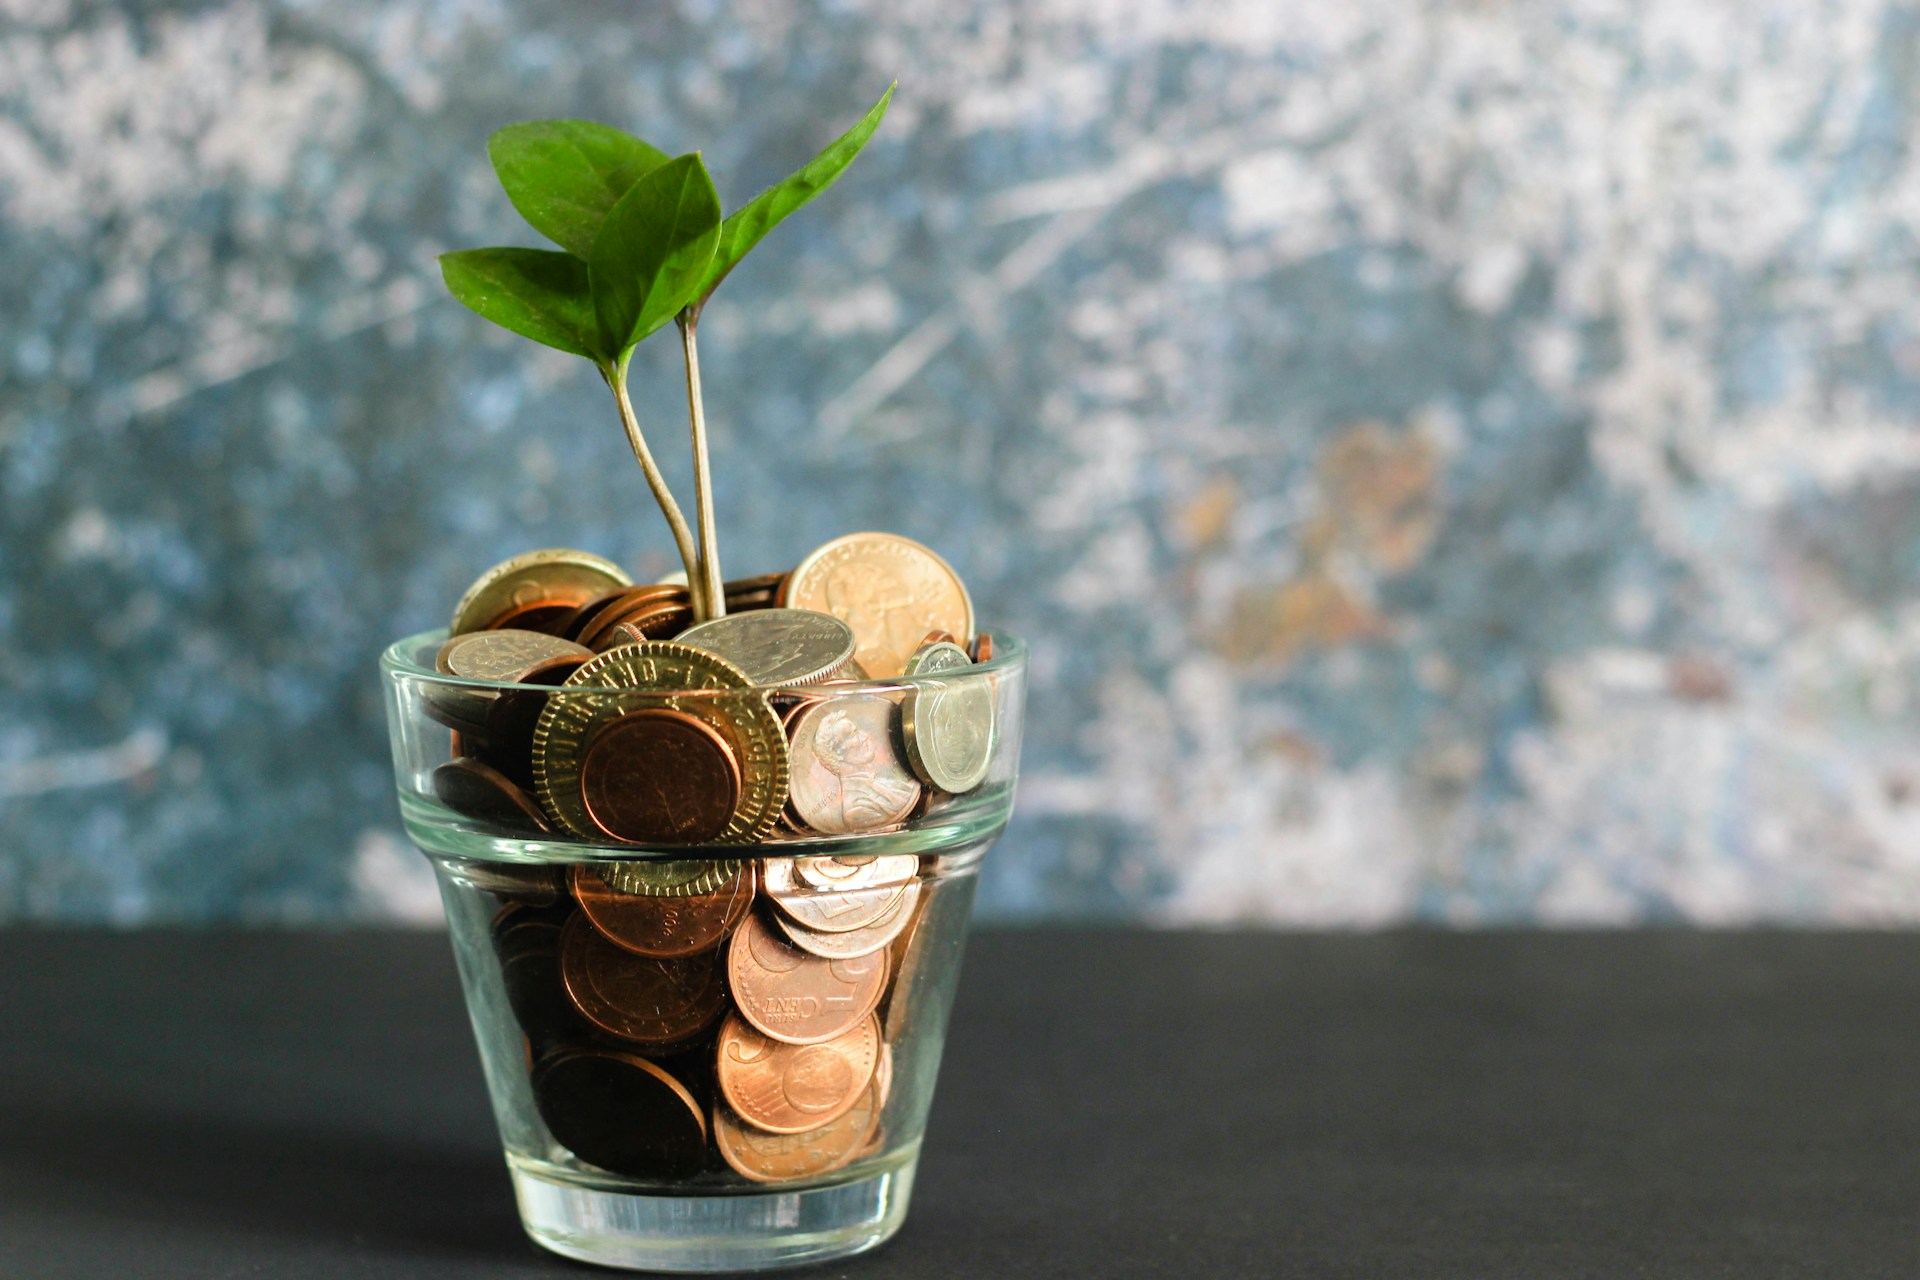 image of pot of coins with leaf sprouting out | SAP Analytics Cloud